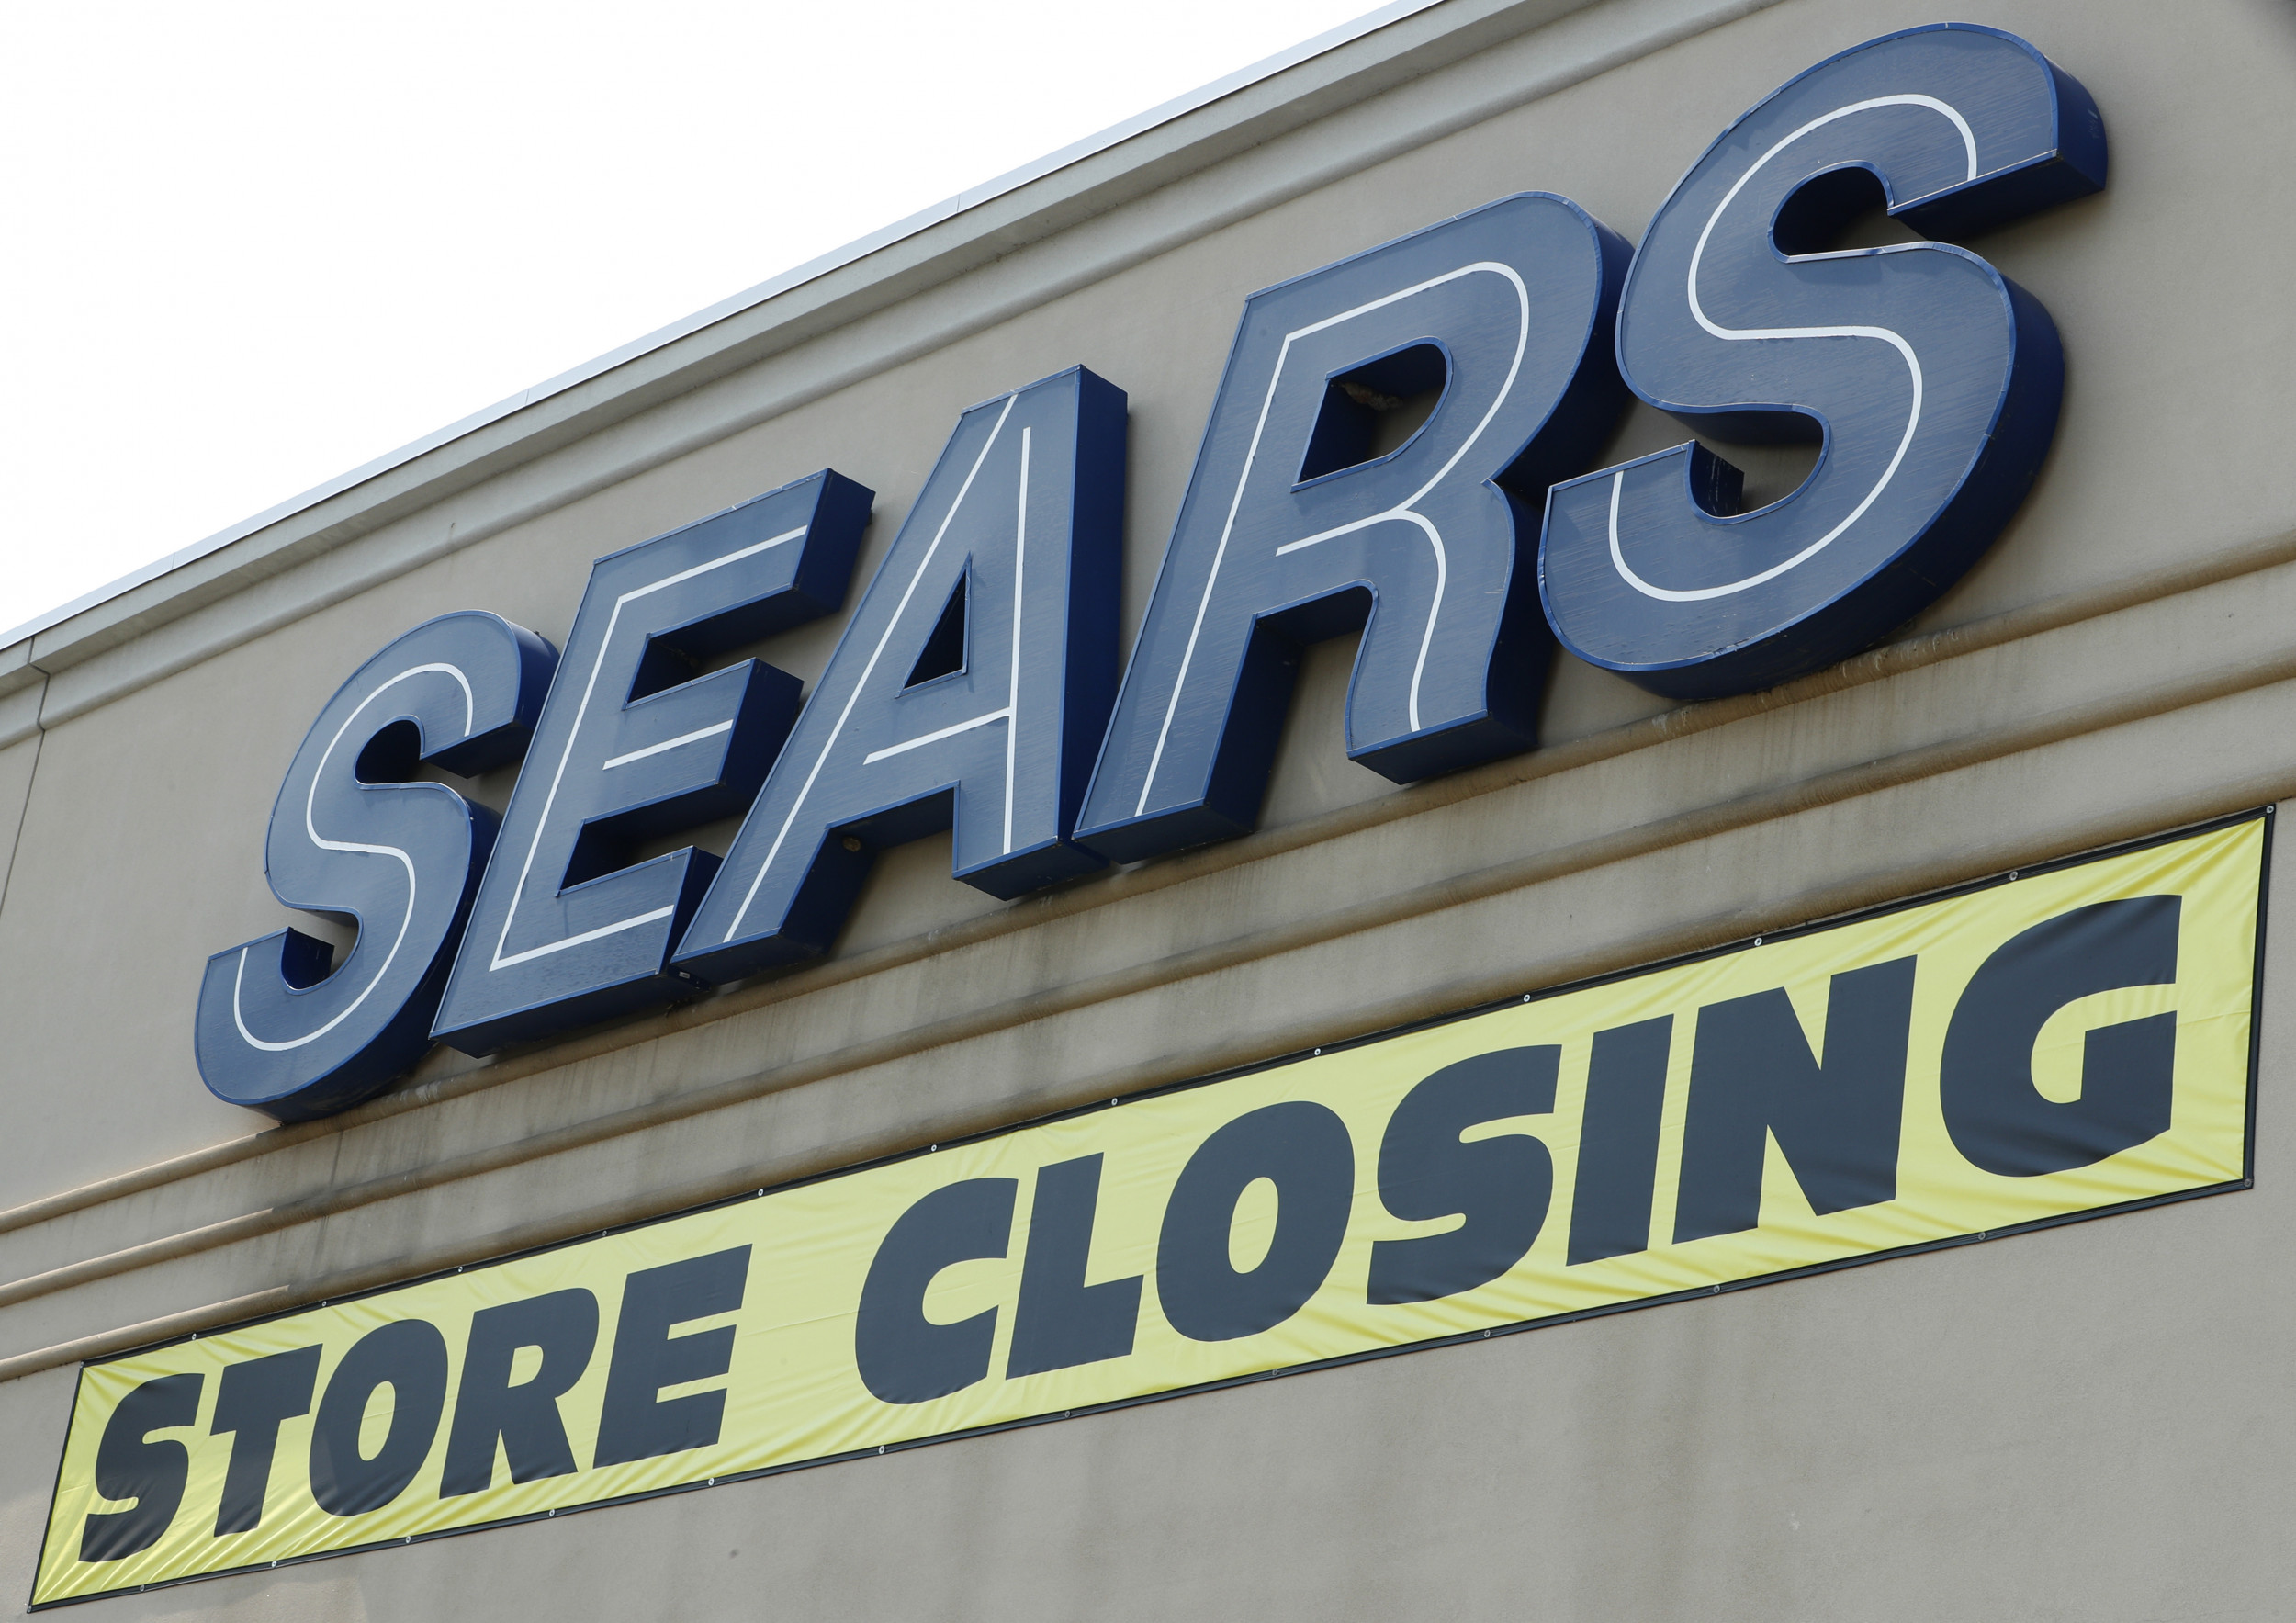 Kmart And Sears Closures: When Will They Close, How Many Stores Will Be Left ?